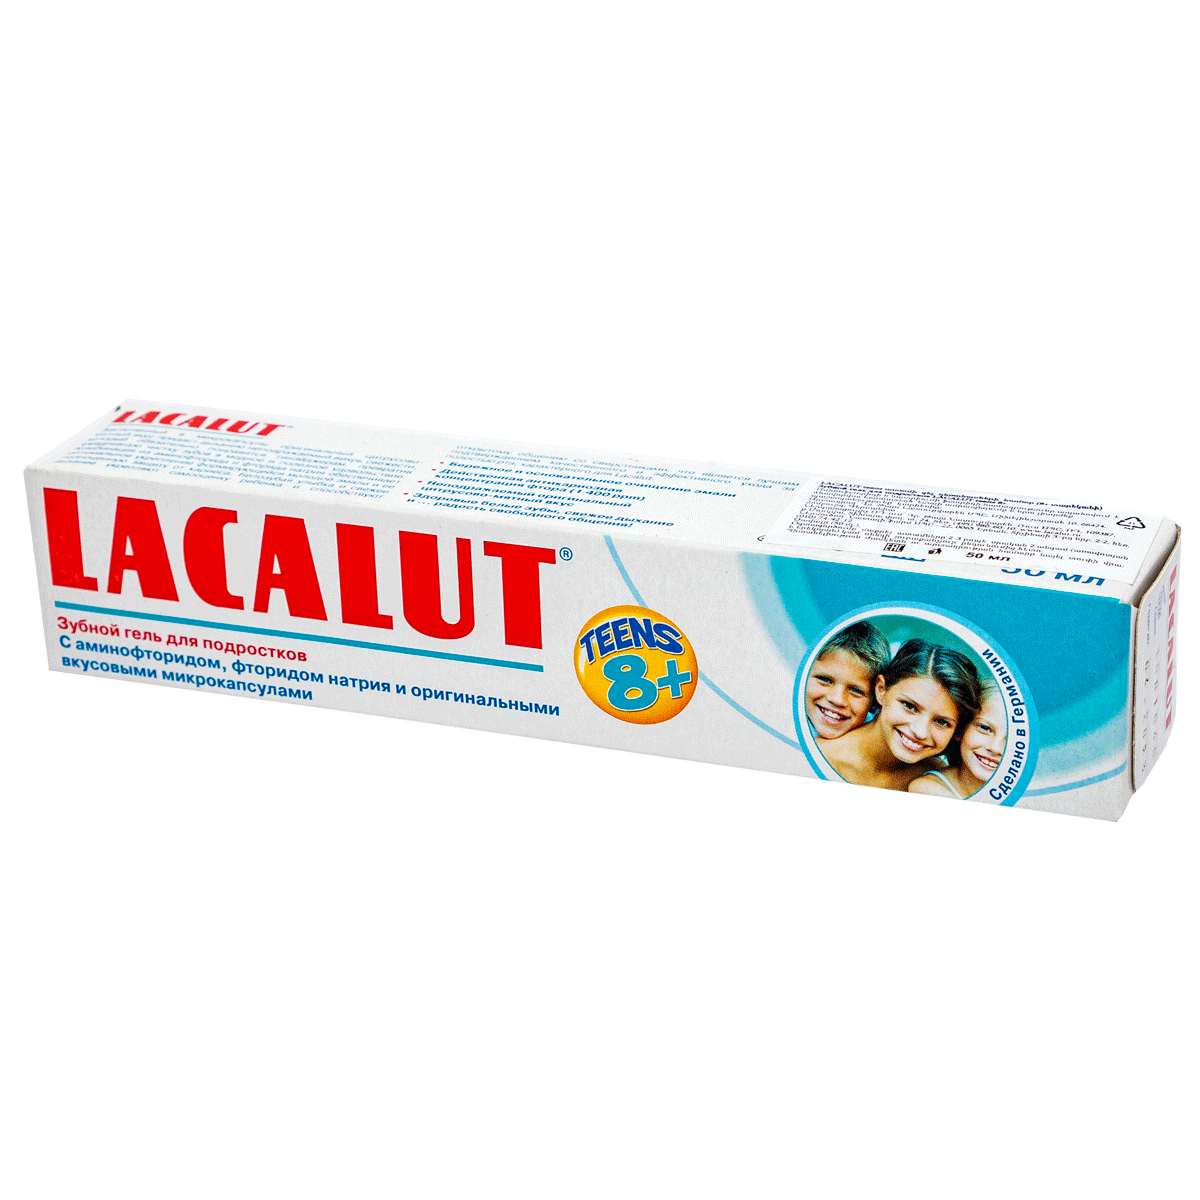 Toothpaste Lacalut